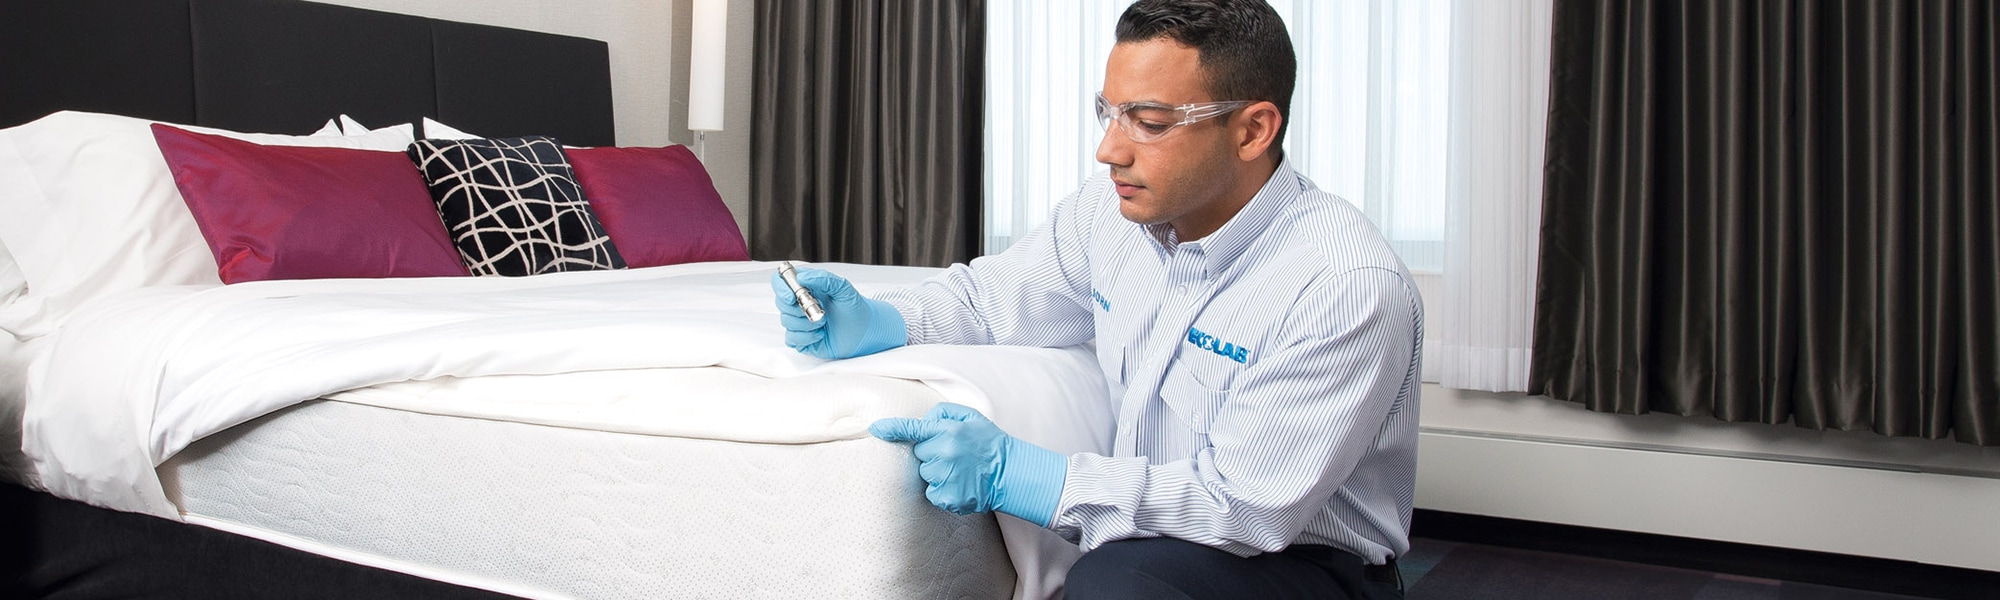 Bed Bug Inspection by an Ecolab Pest Expert